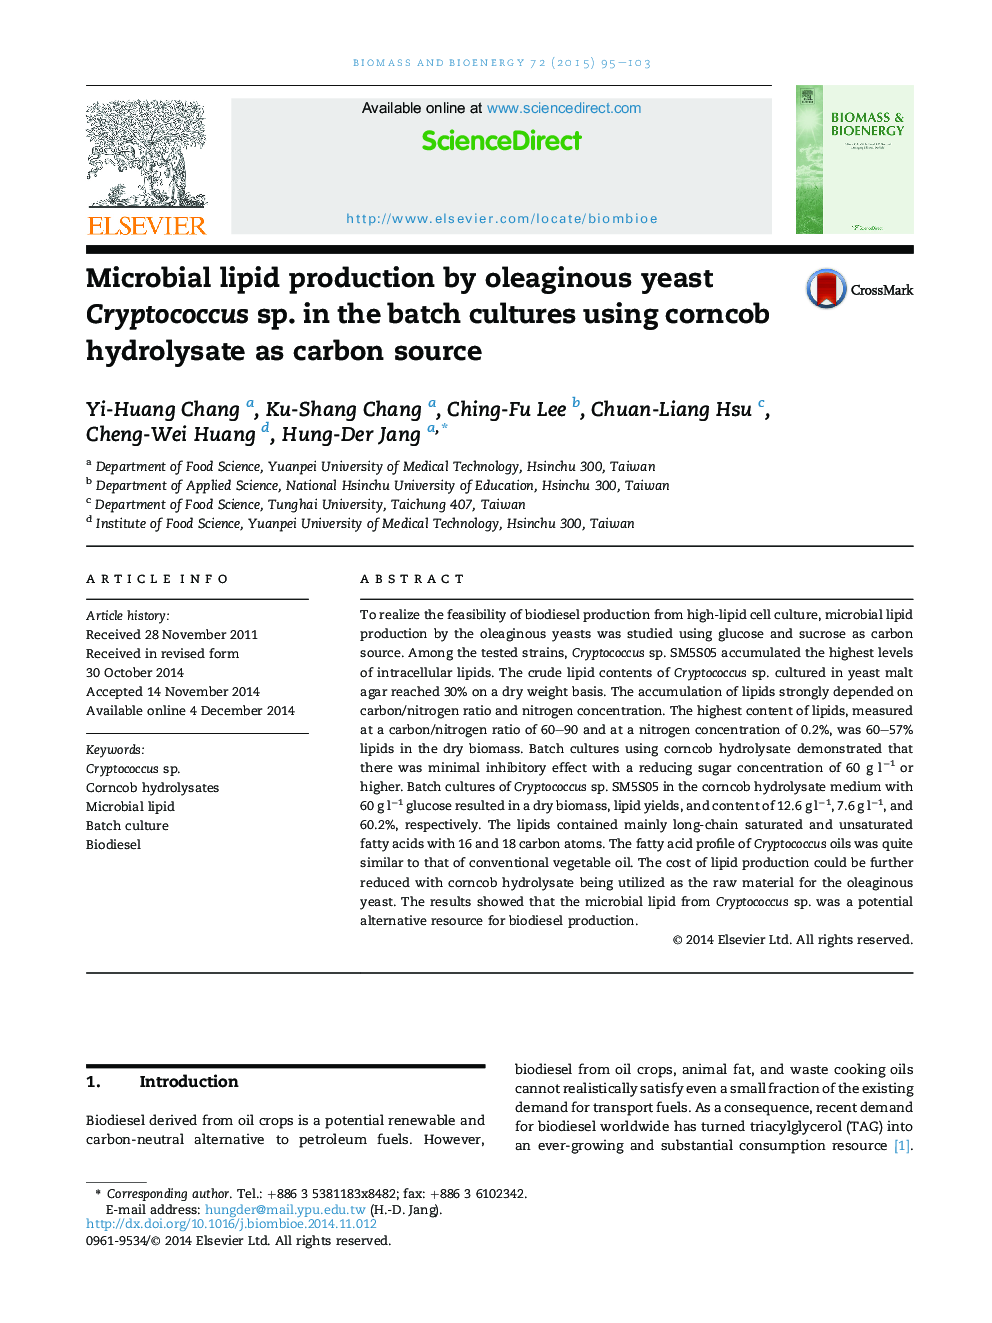 Microbial lipid production by oleaginous yeast Cryptococcus sp. in the batch cultures using corncob hydrolysate as carbon source